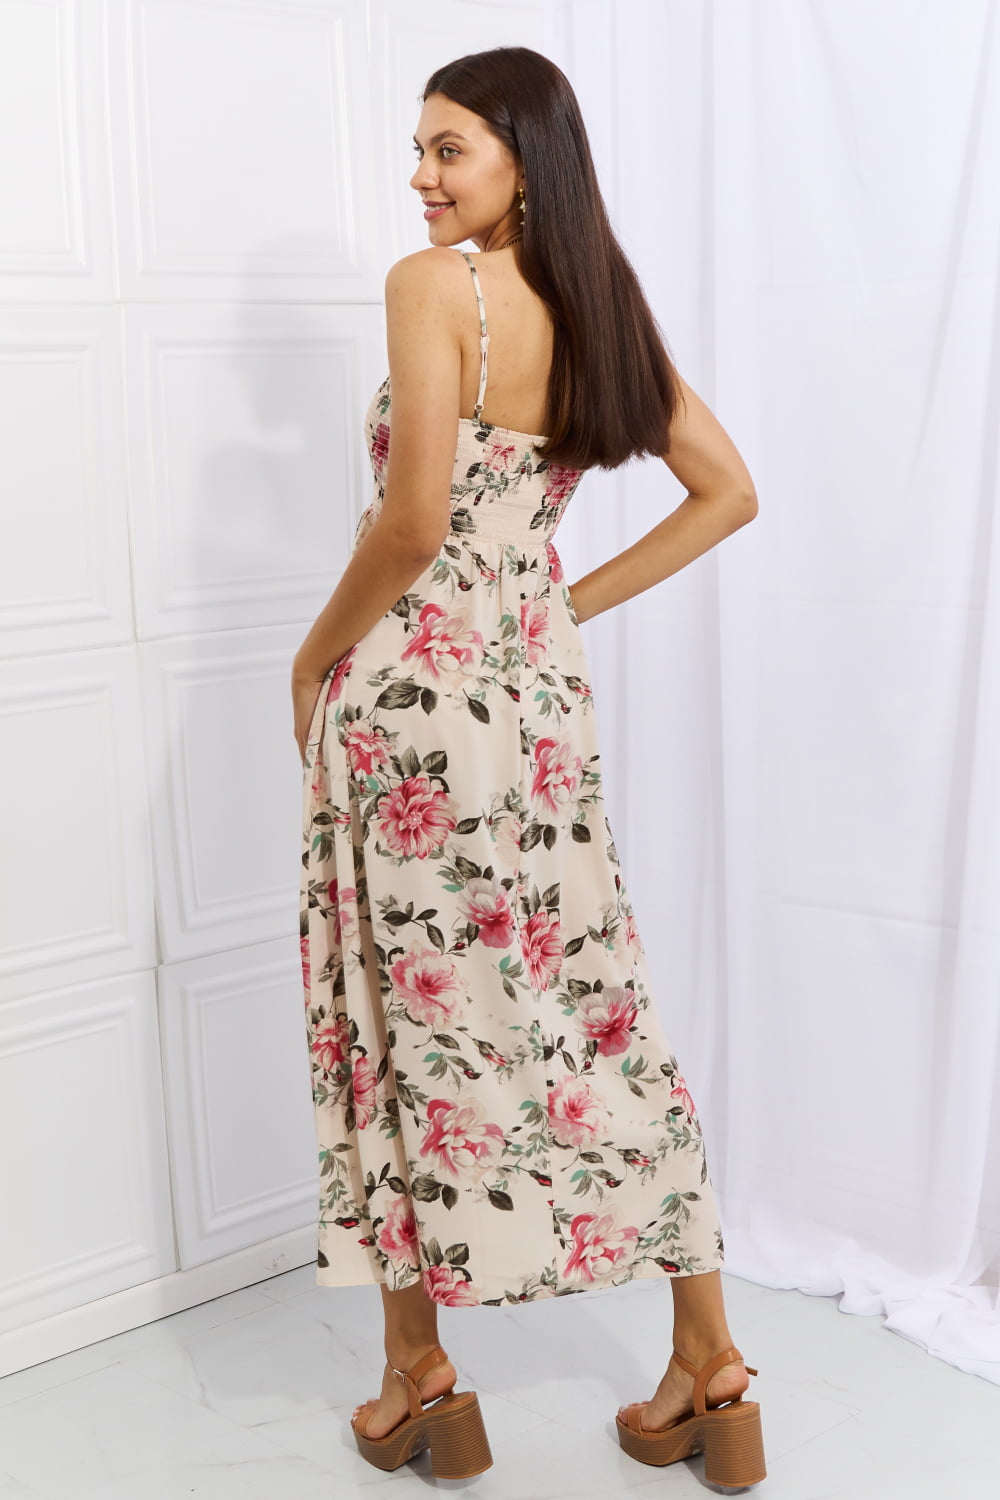 Hold Me Tight Sleeveless Floral Maxi Dress in Pink - All Dresses - Dresses - 2 - 2024